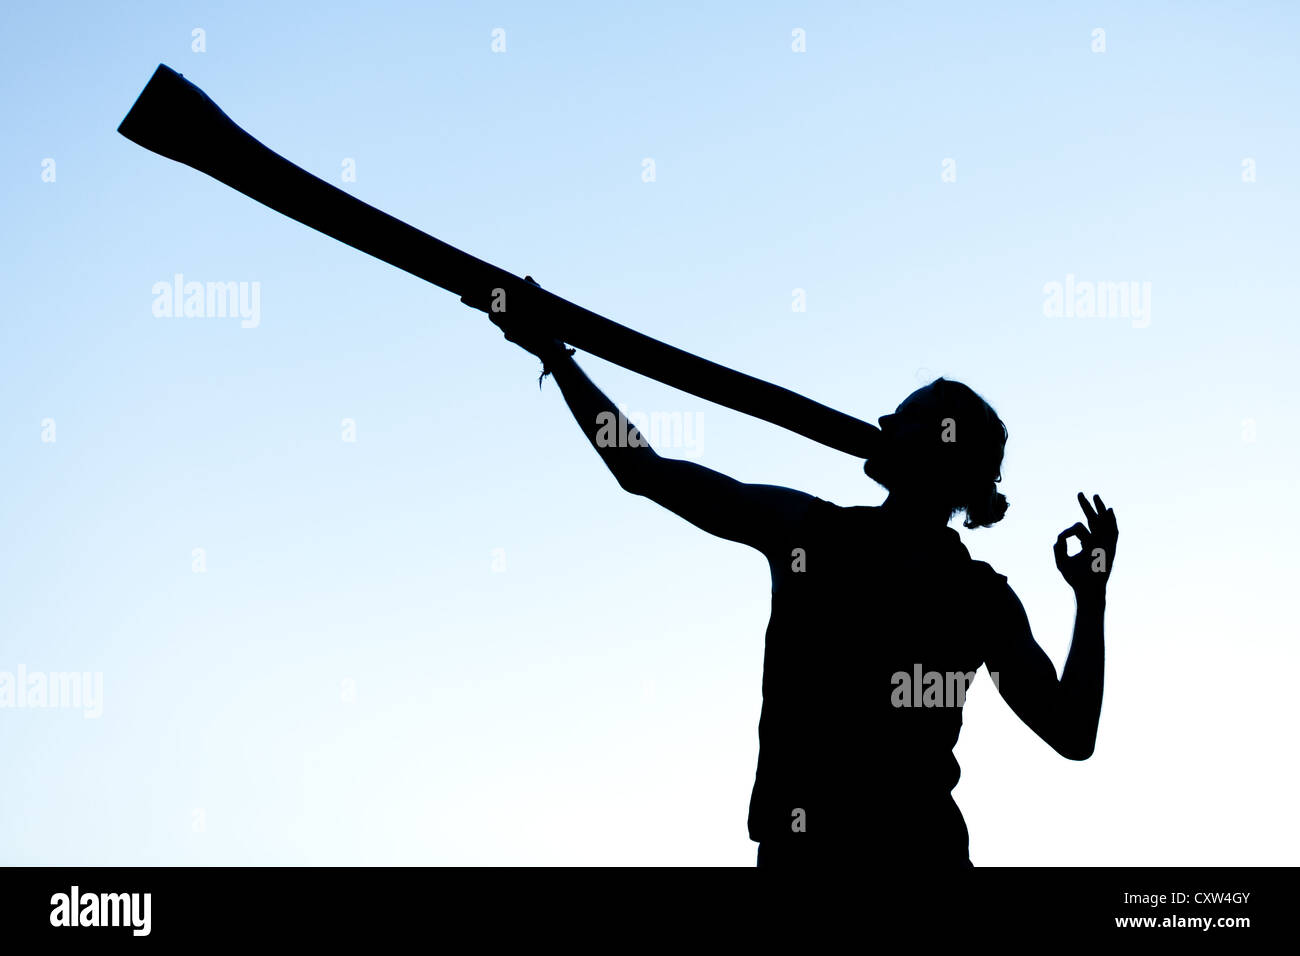 A didgeridoo player plays his didge while silhouetted against the evening sky. Hand forms a sacred mudra. Stock Photo